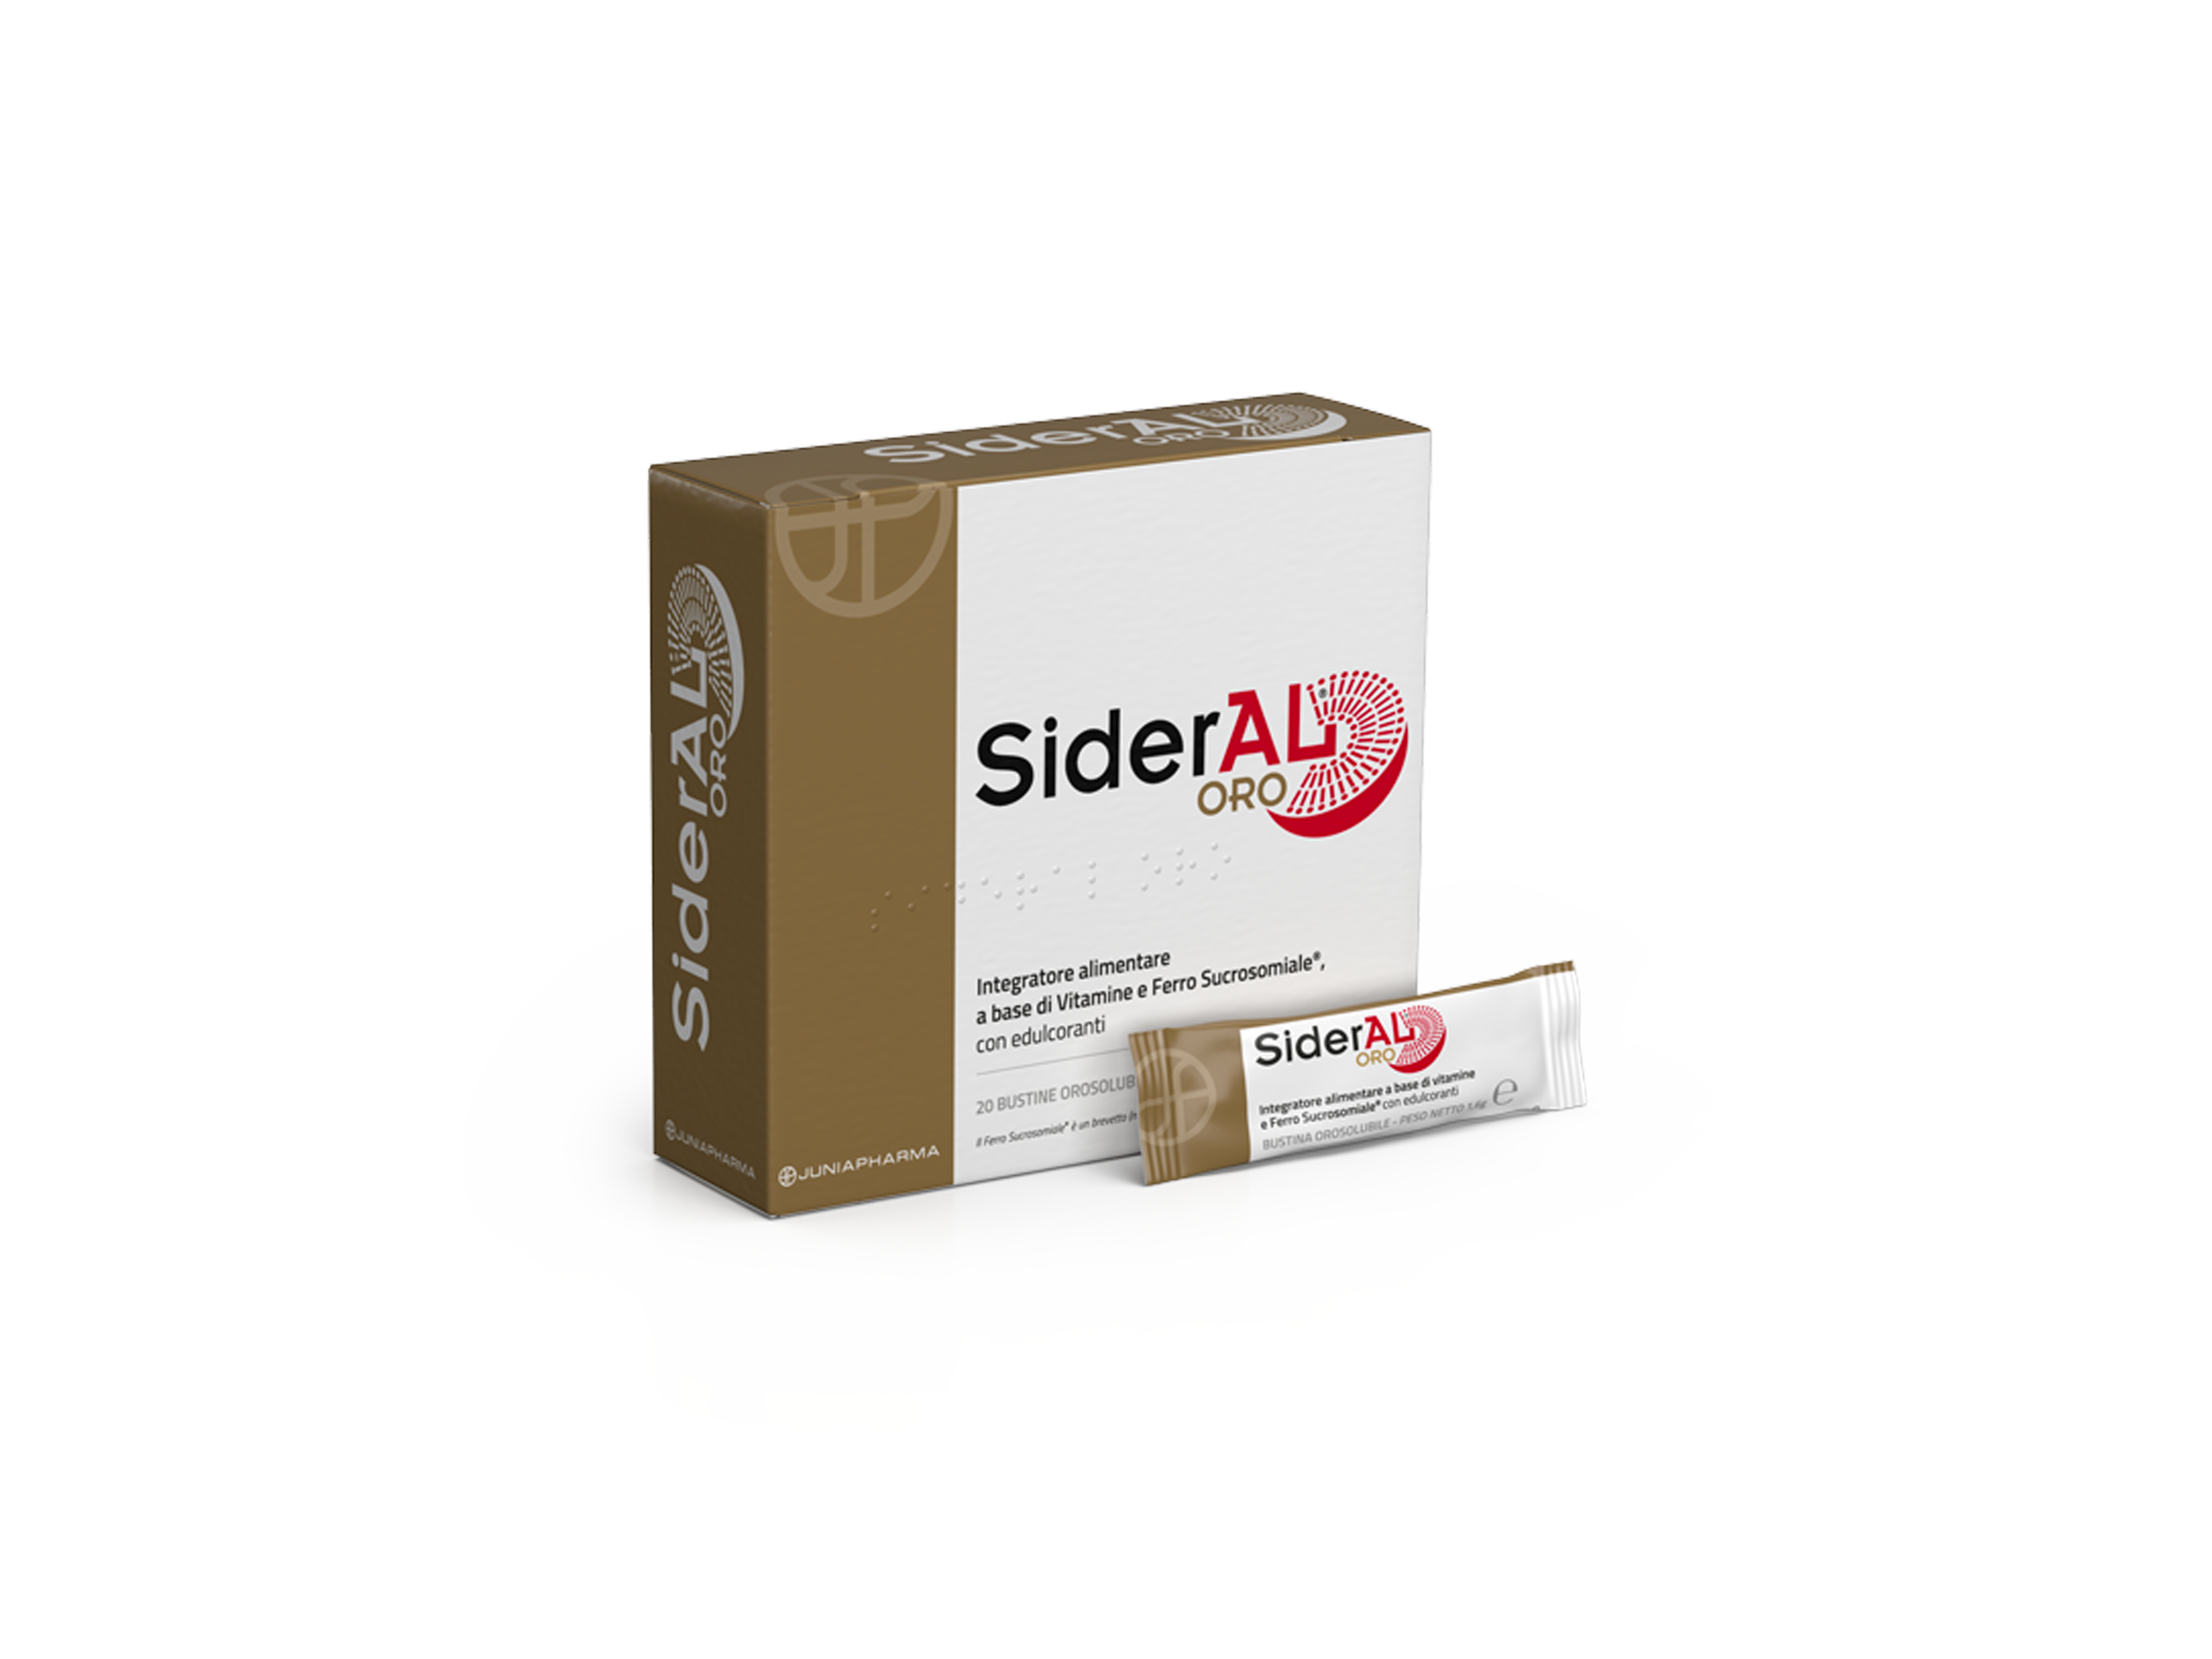 SiderAL® Oro